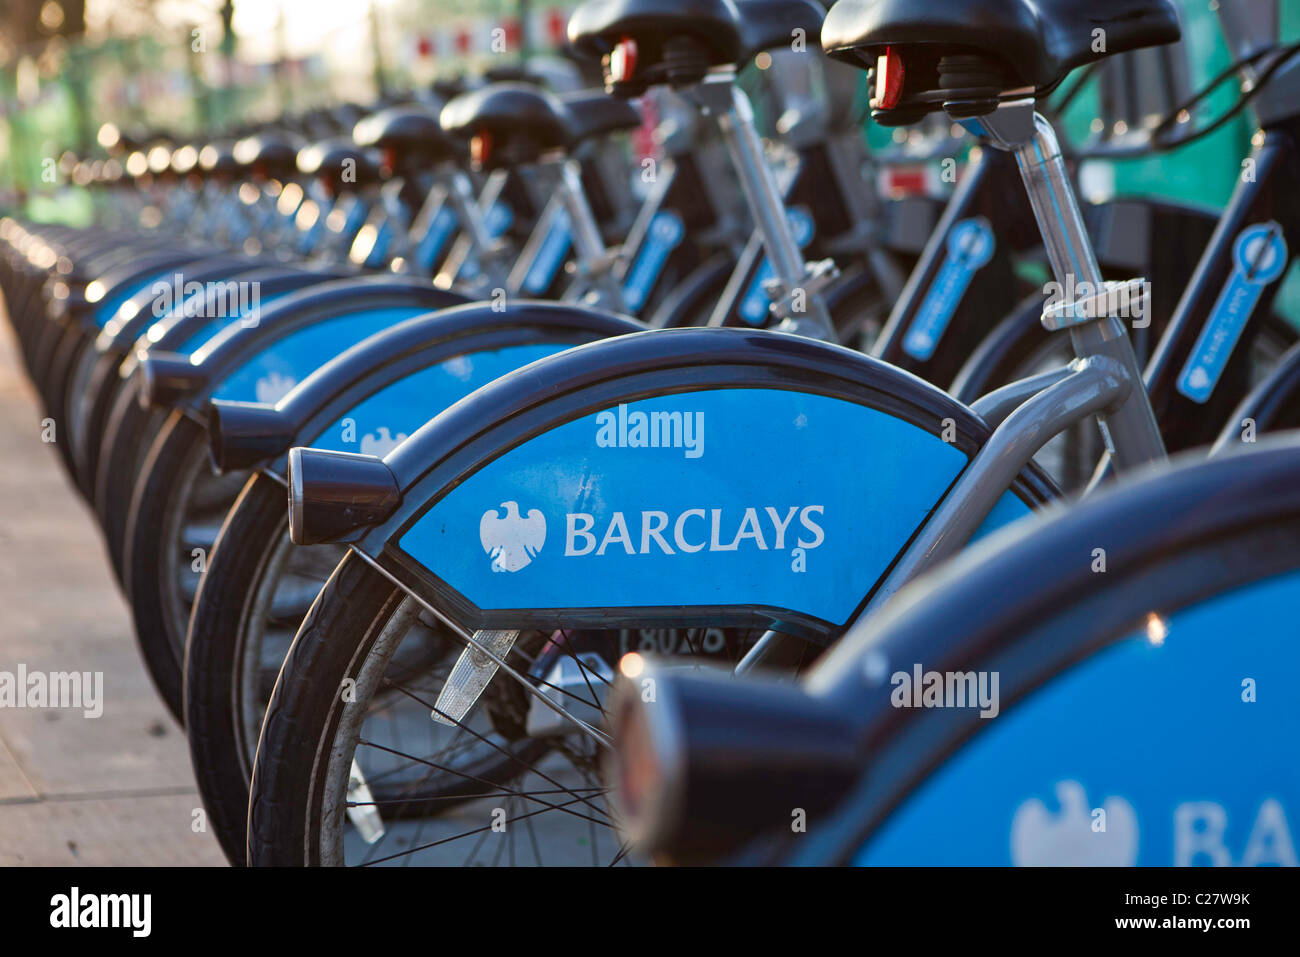 Bikes lined up in the Barclay Cycle Hire stand, Mayfair, London. Part of Transport for London. Stock Photo